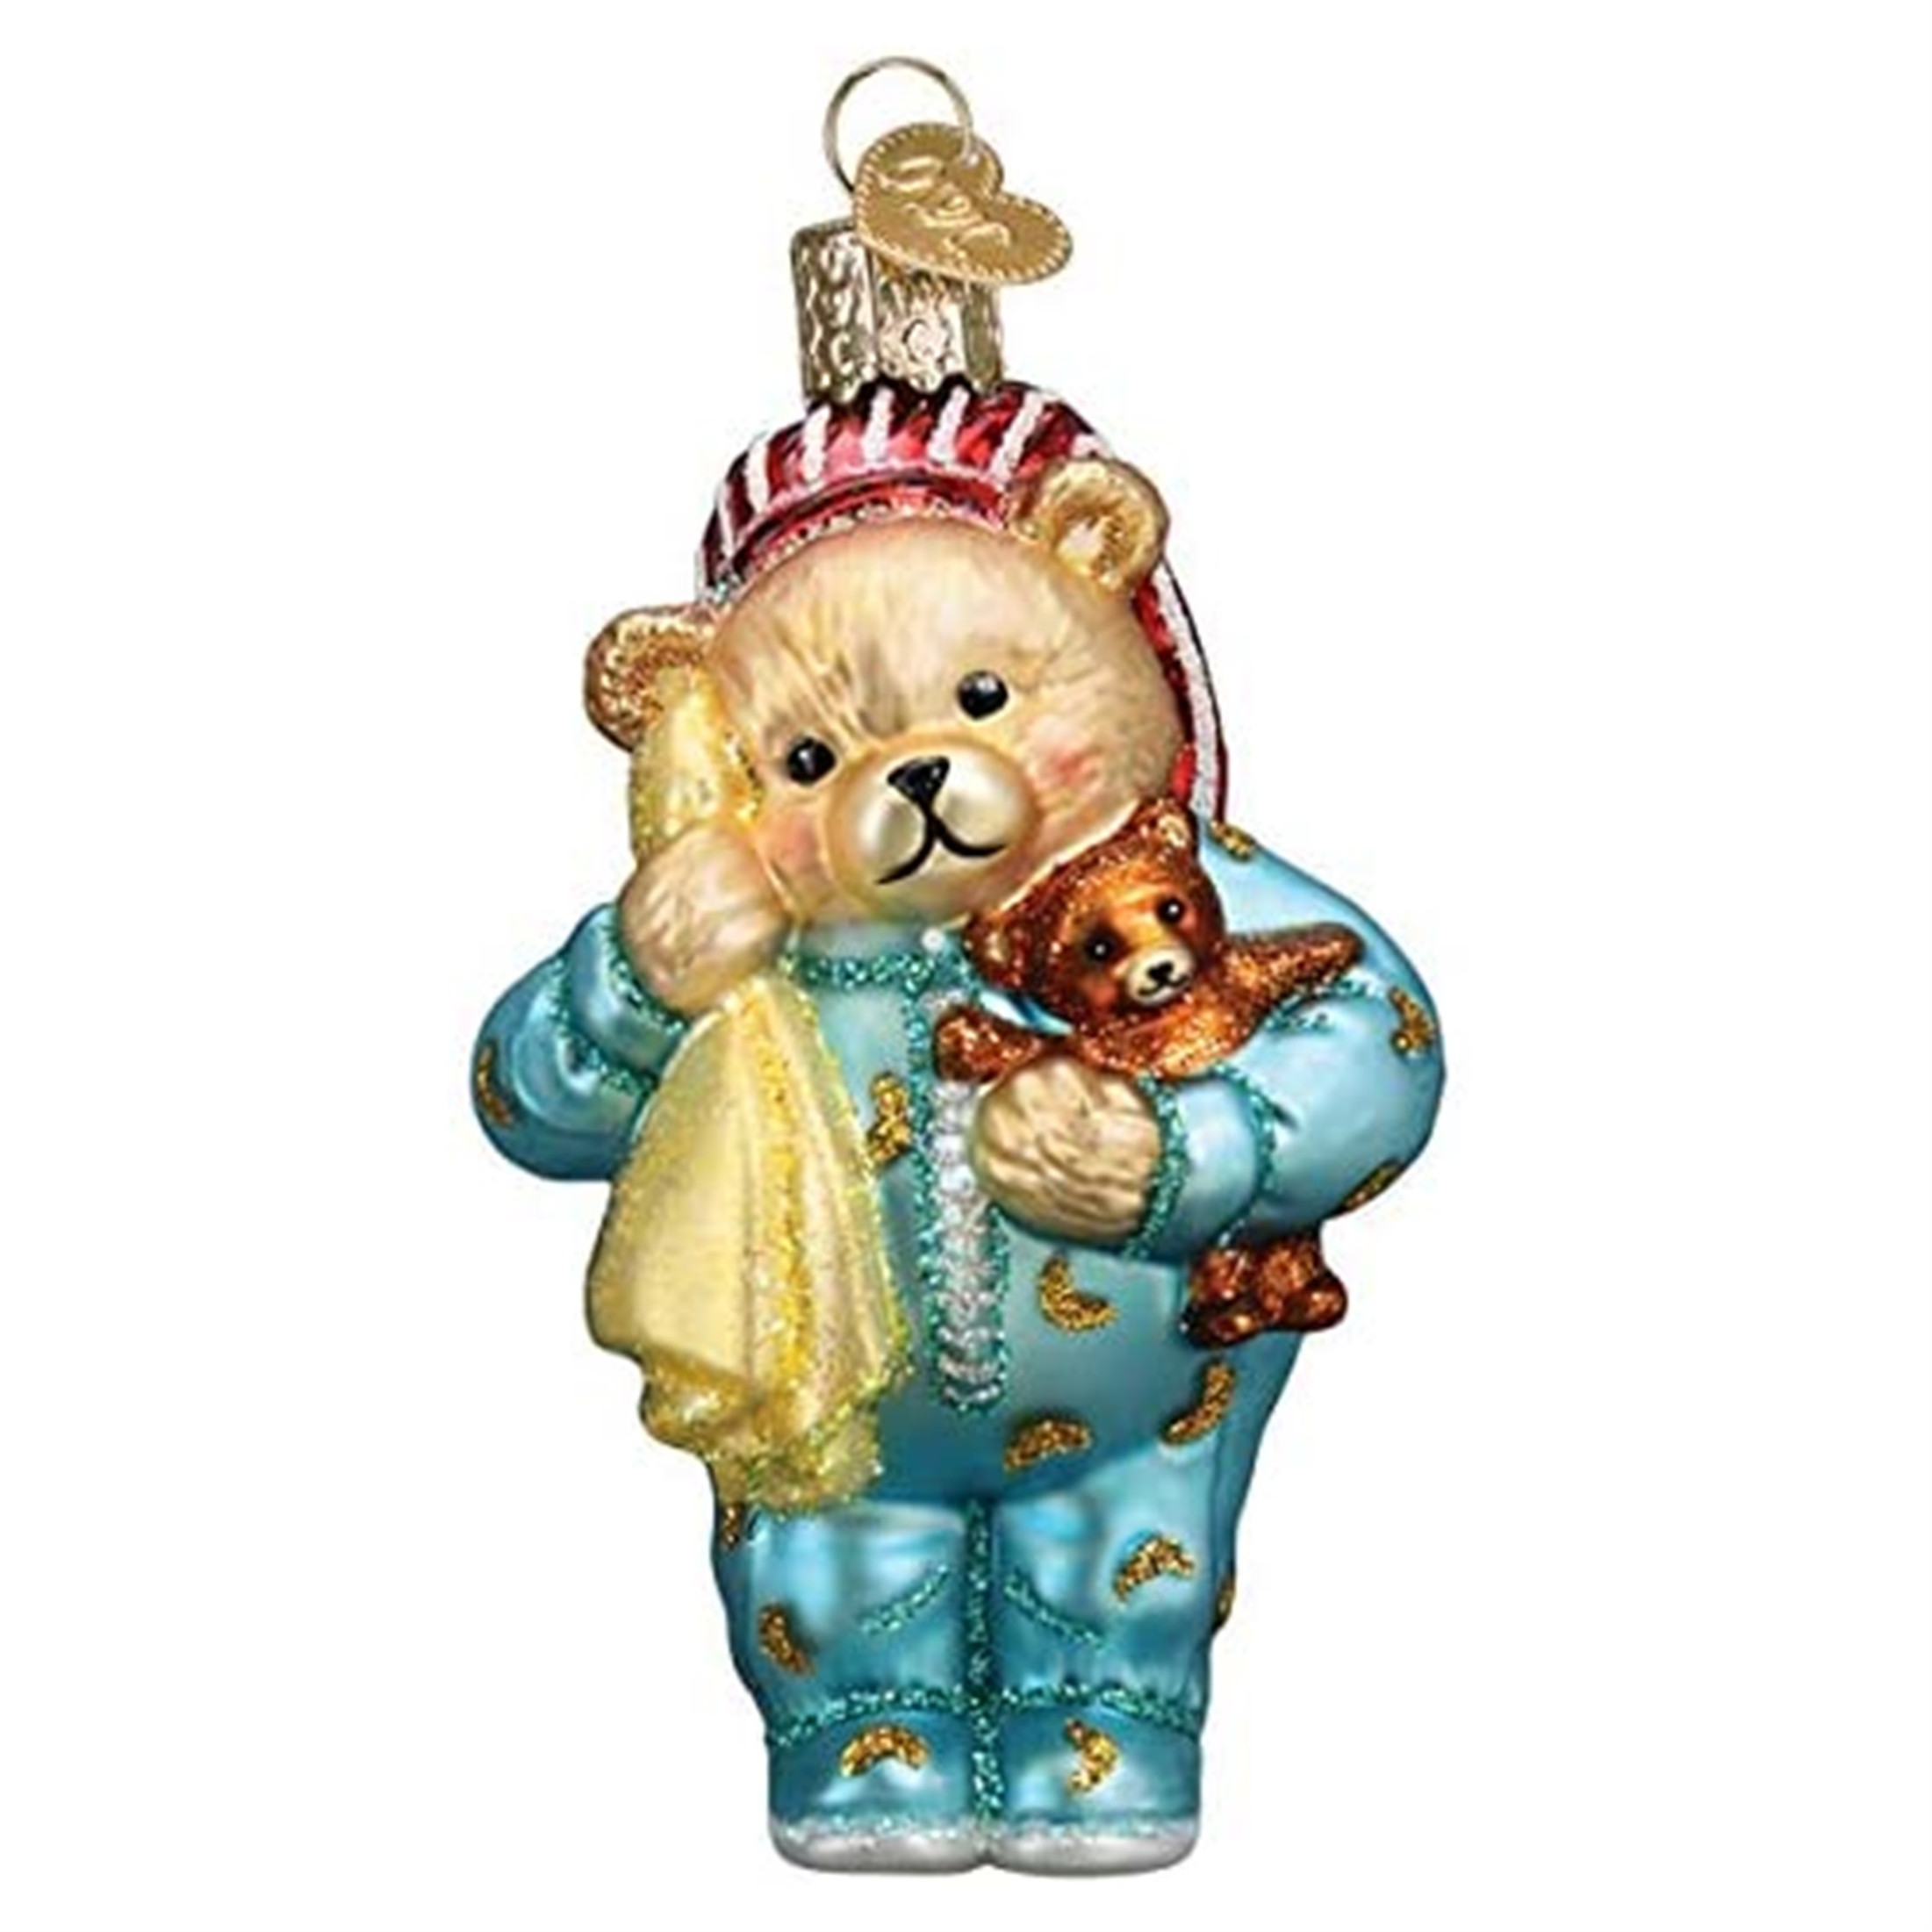 Old World Christmas Glass Blown Ornament, Bedtime Teddy Bear (With OWC Gift Box)